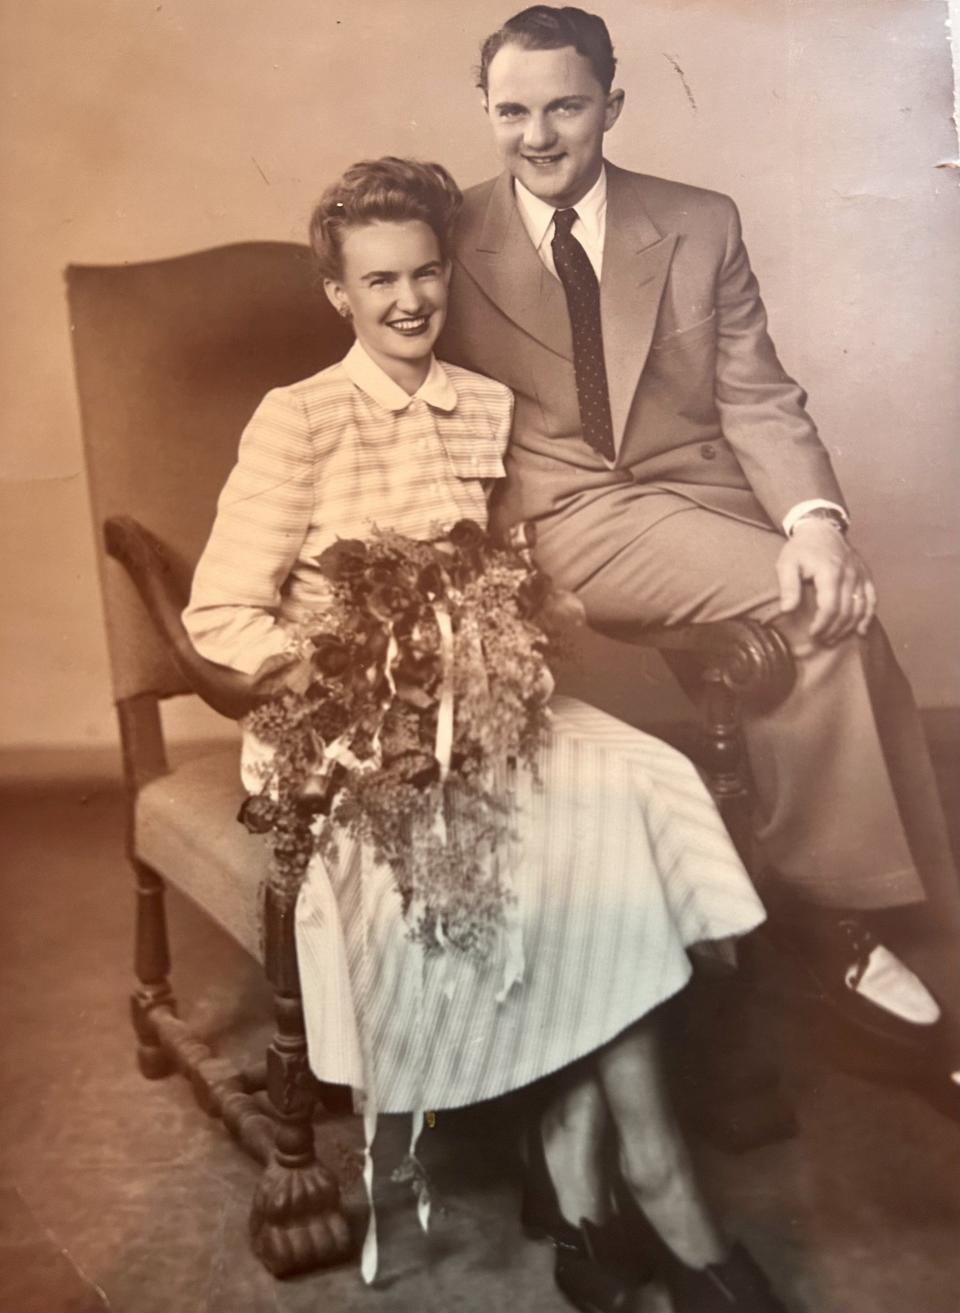 Preben and Nina Johansen met in post-World War II Europe, where she was an American civil-service worker from St. Petersburg and he would go on to serve in the Danish Navy. After they married, they moved to Jacksonville and eventually owned the popular oceanfront restaurant, Le Chateau.